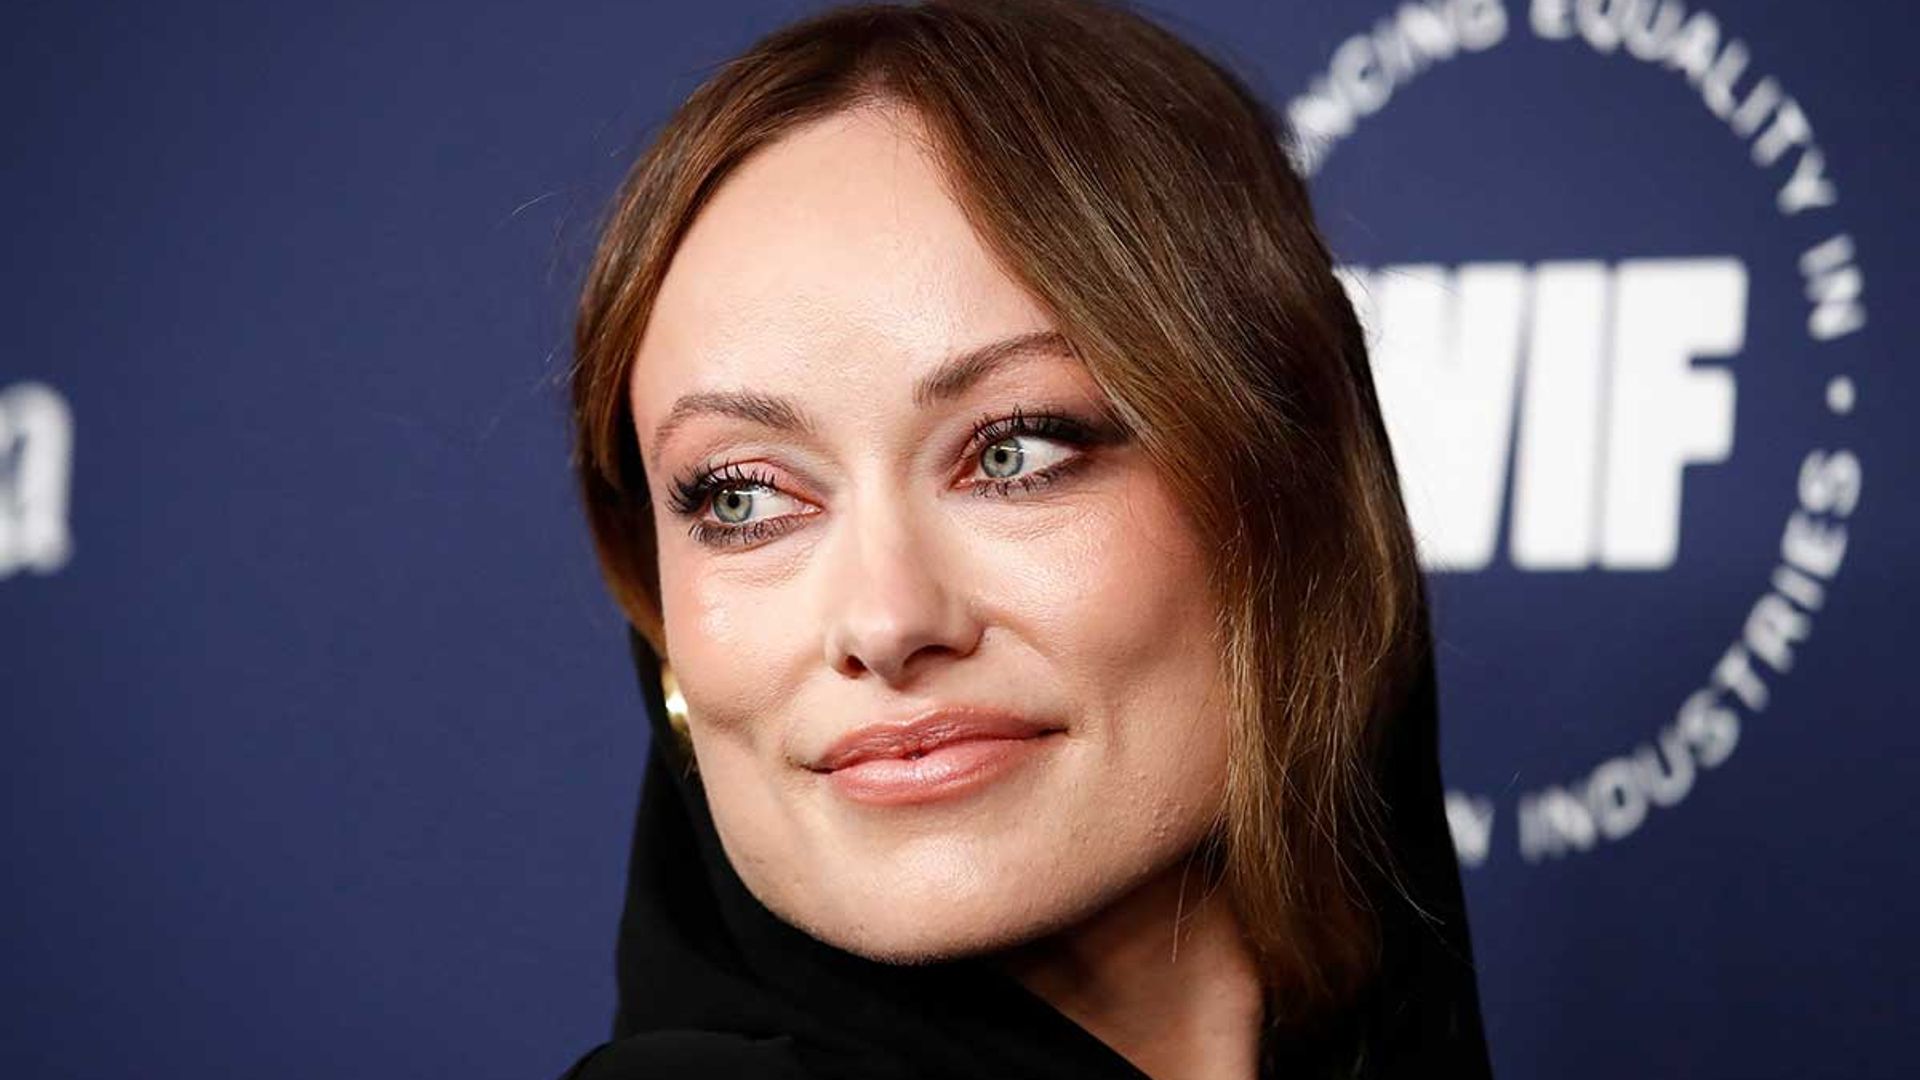 Olivia Wilde Wears Completely Sheer Top at Saint Laurent Fashion